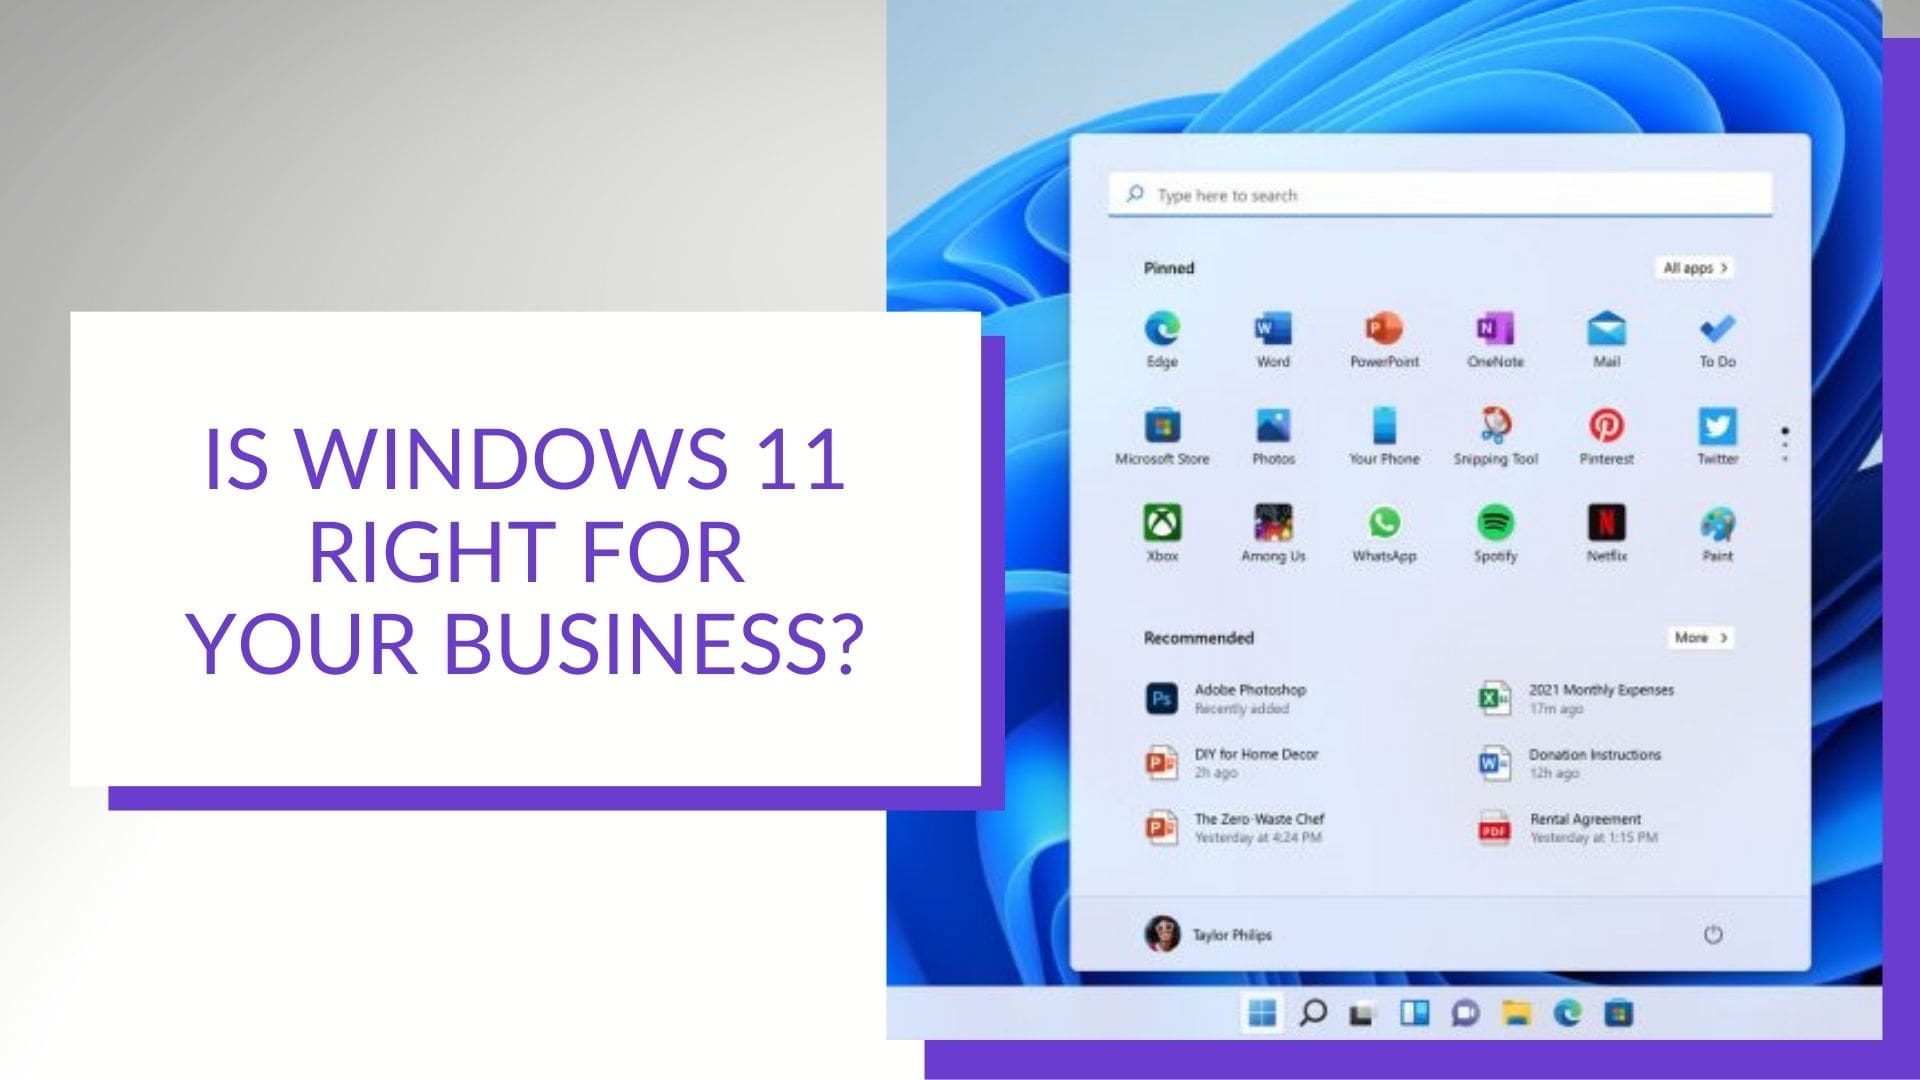 Windows 11 For Business image